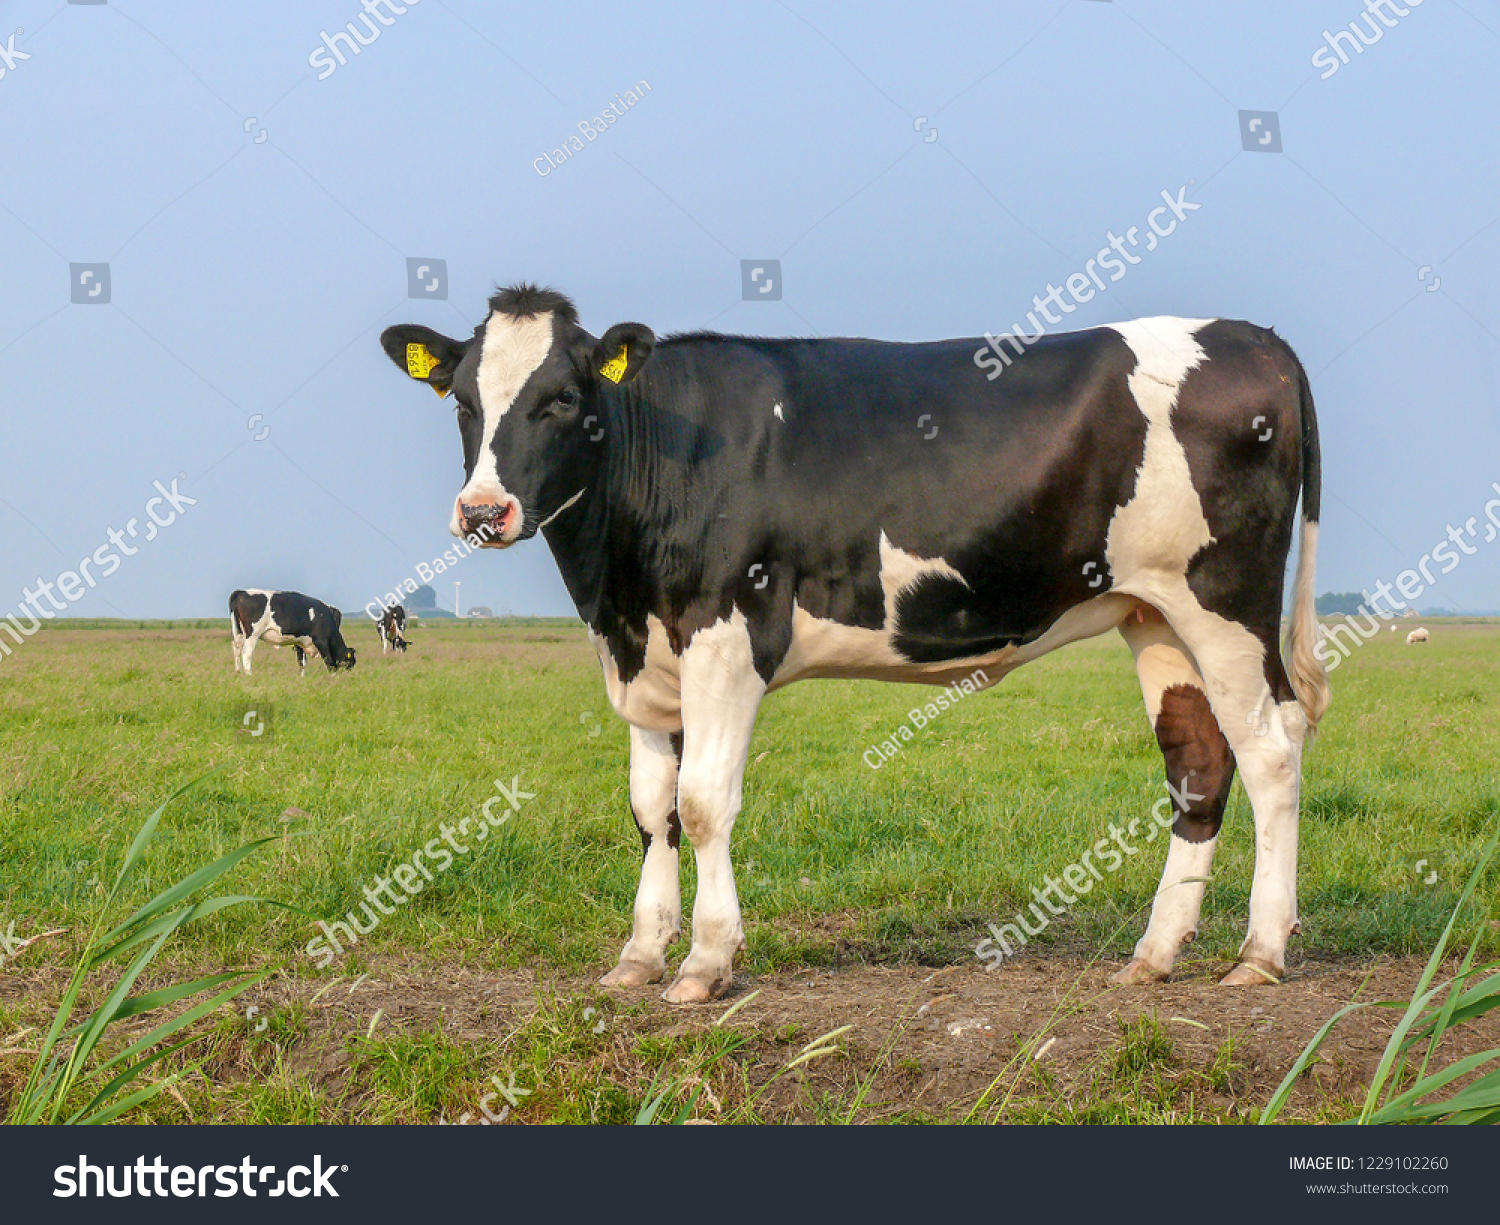 Black and white cow, heifer, small udders, holstein, in the Netherlands standing on green grass in a meadow, pasture, at the background a few cows, yellow ear tags and a blue sky. #1229102260